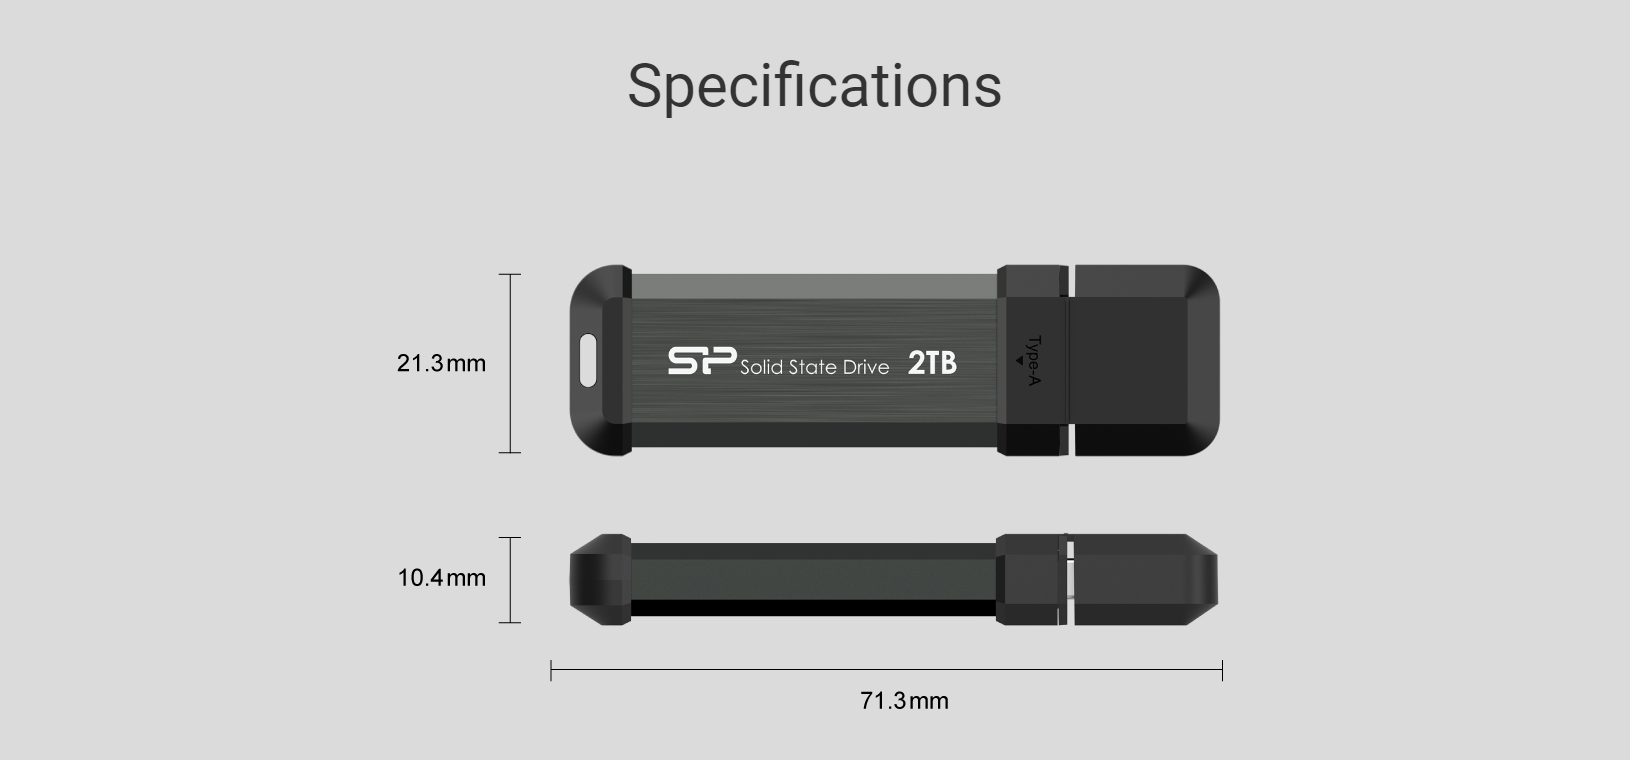 A large marketing image providing additional information about the product Silicon Power MS70 250GB USB 3.2 Gen 2 SSD Flash Drive - Gray - Additional alt info not provided